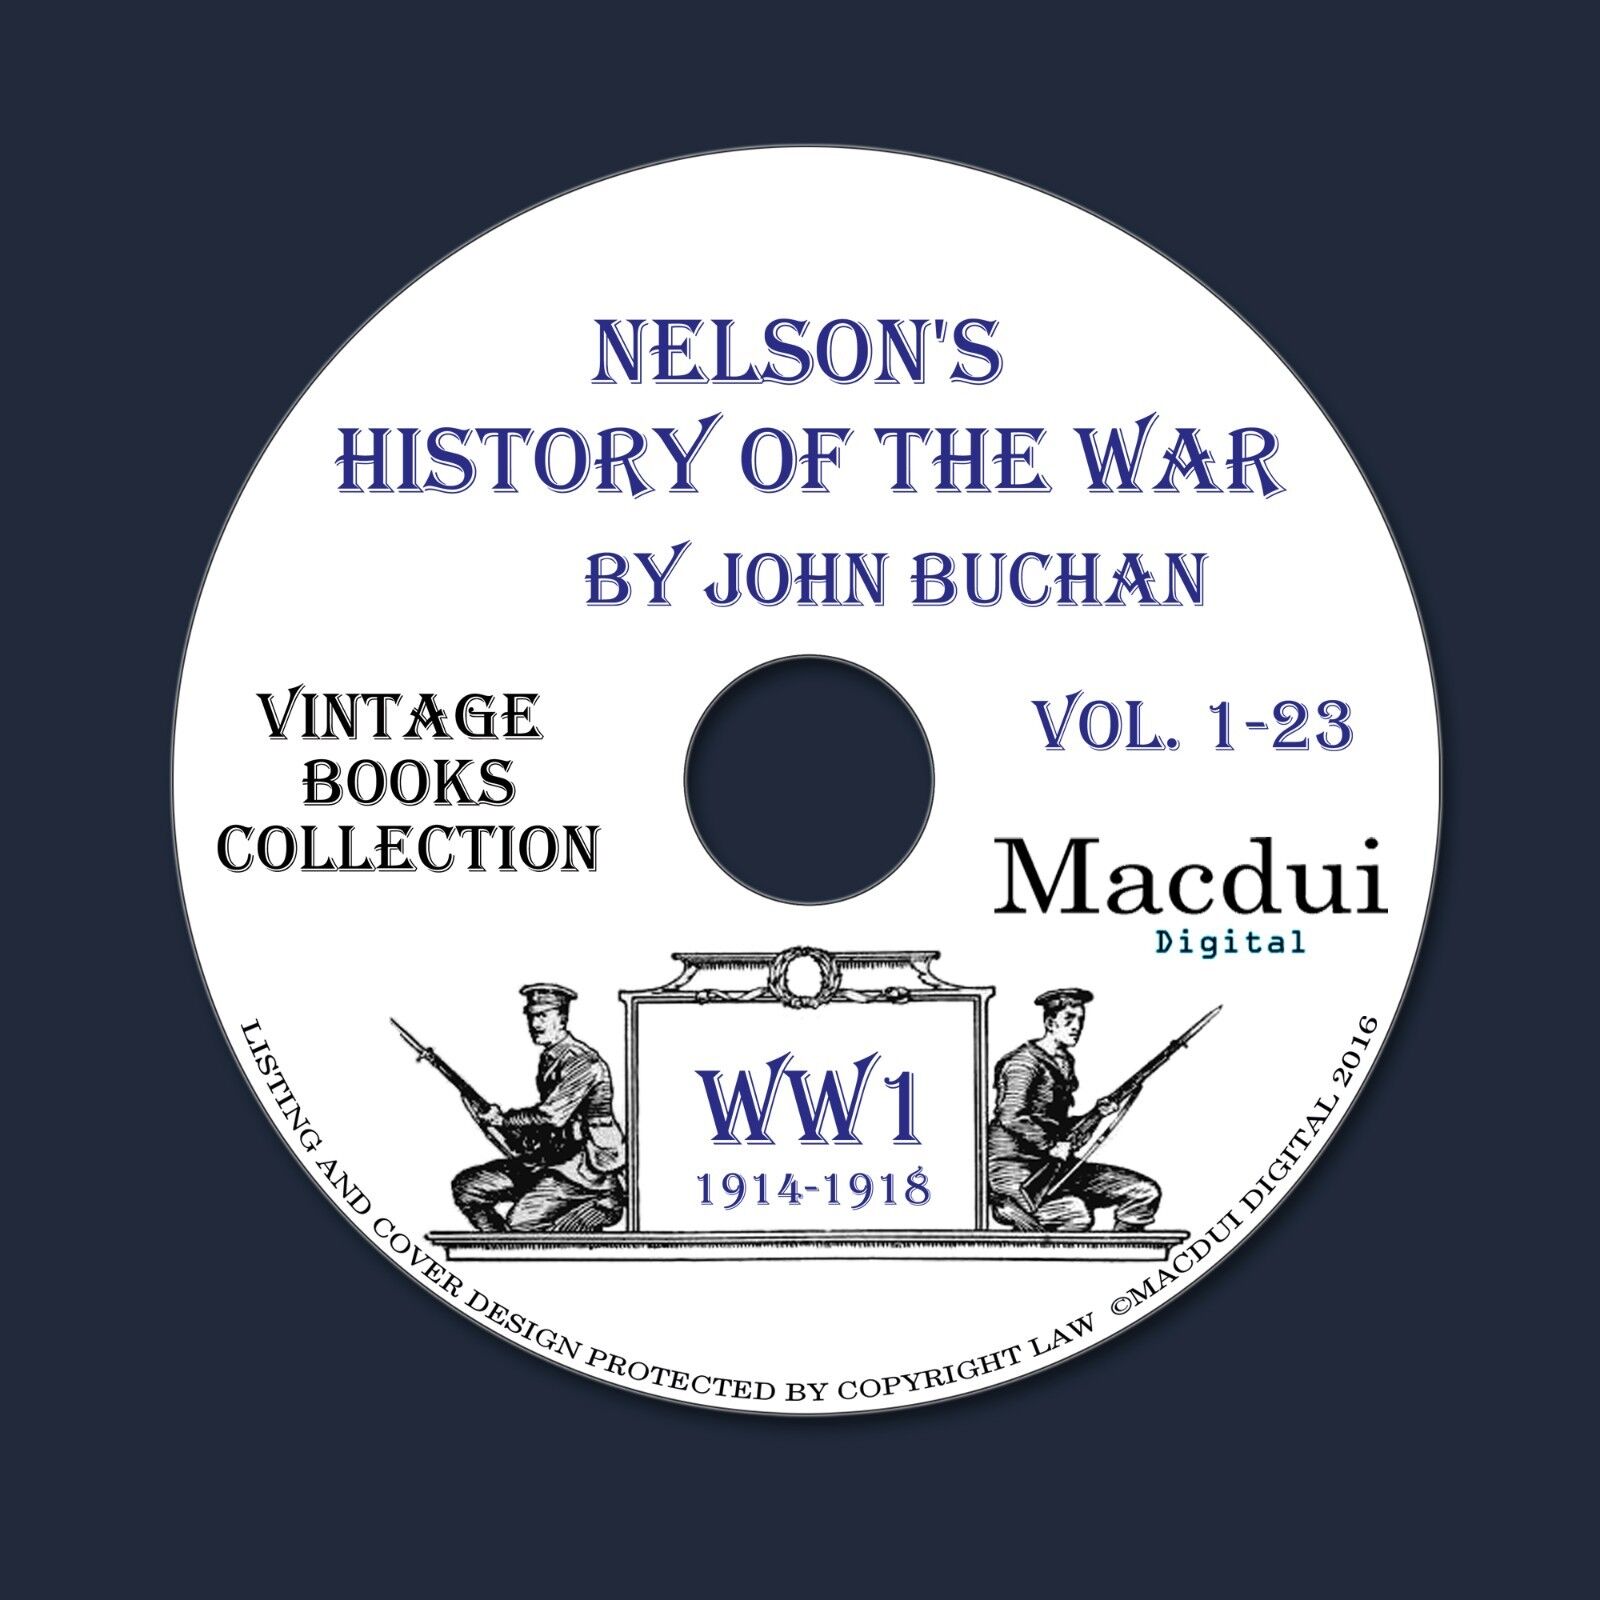 Nelson\'s History of the War 1914-1919 Vintage Books Collection 23 PDF EBooks DVD